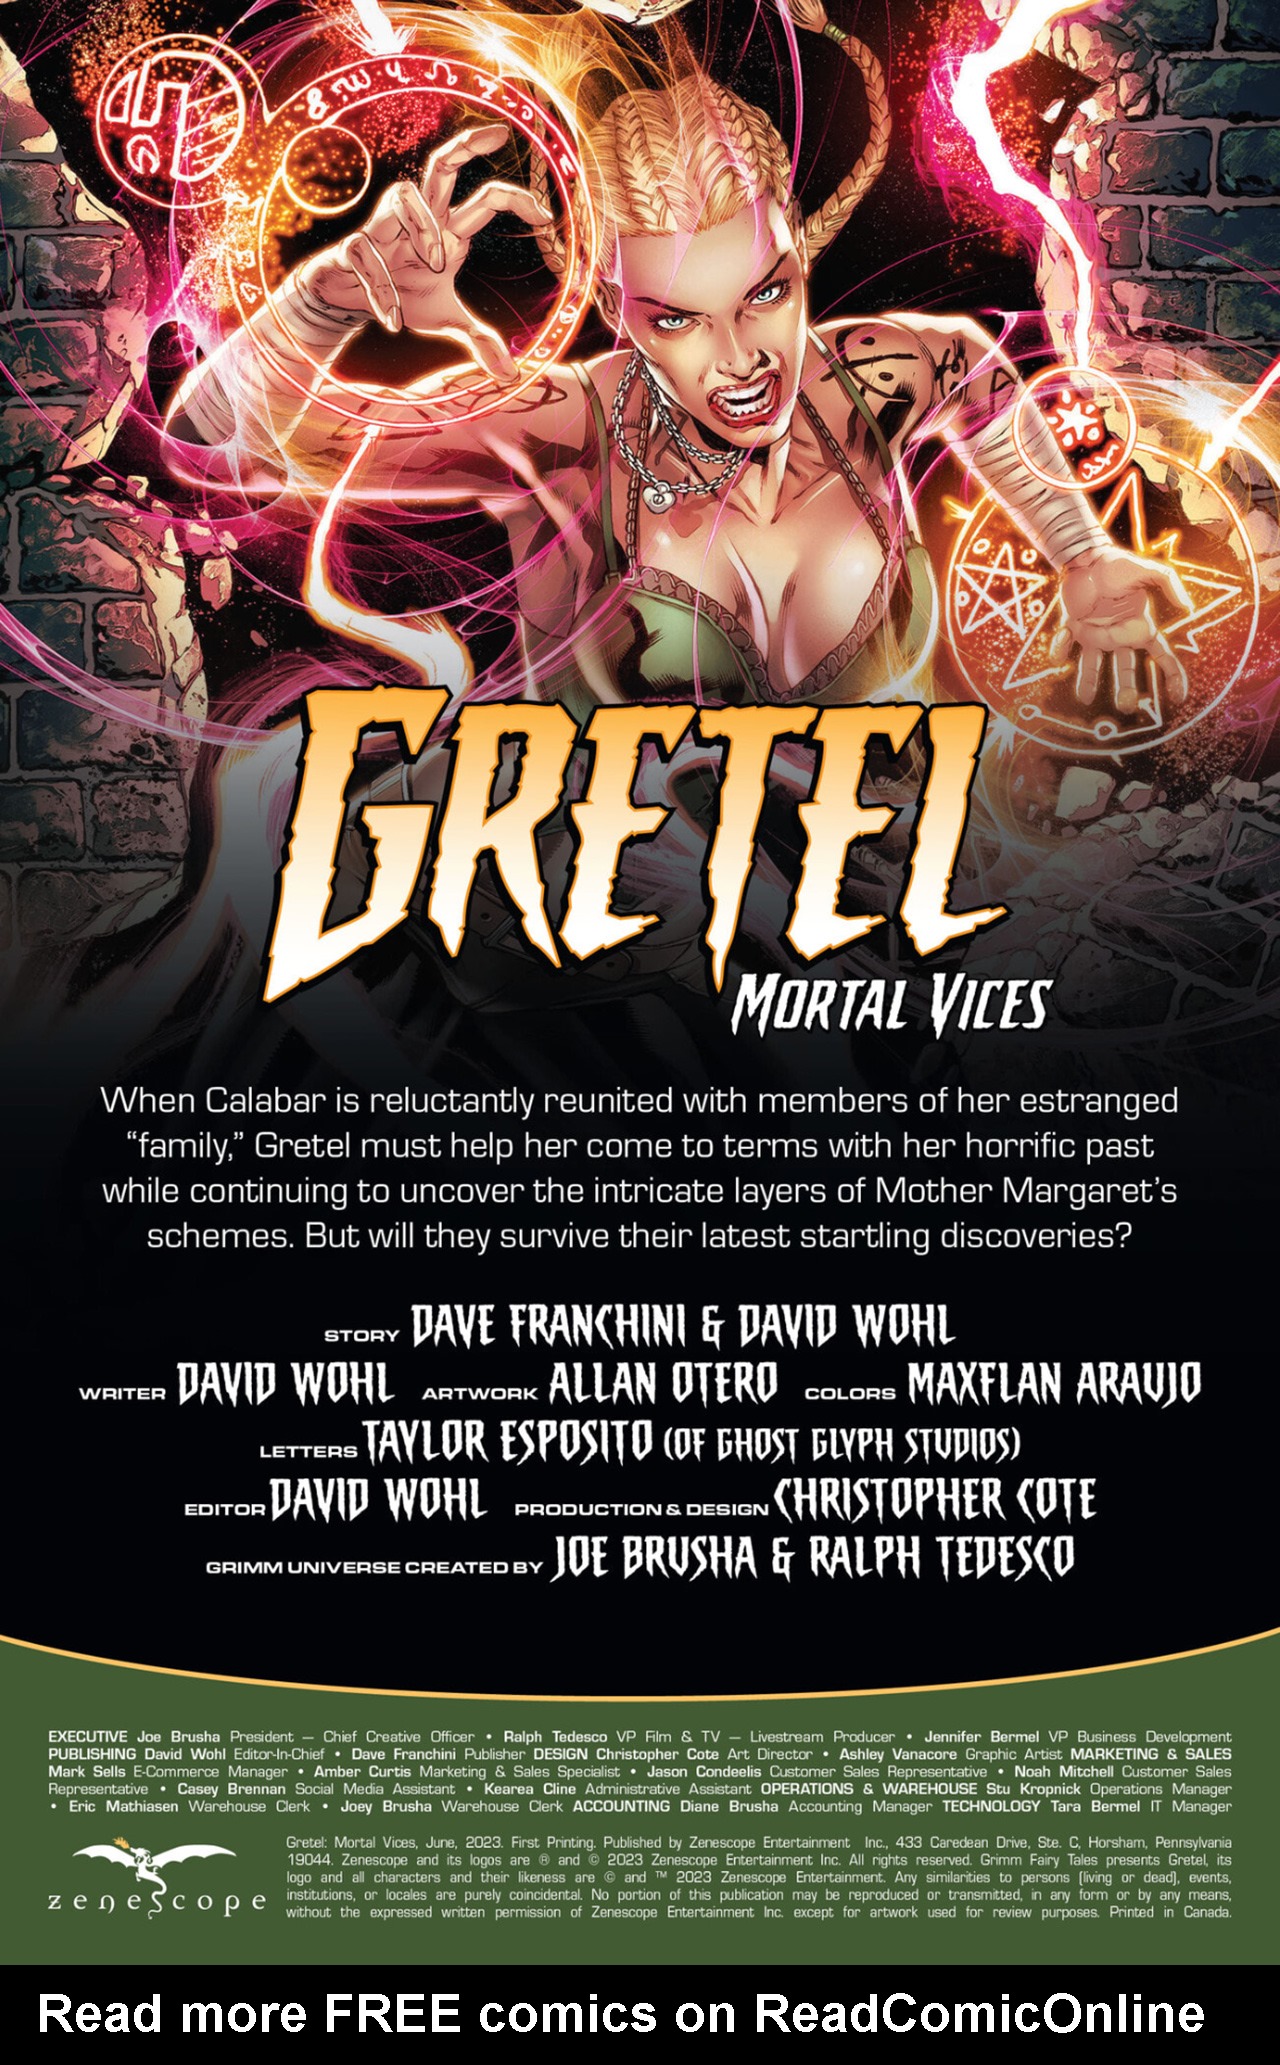 Read online Gretel: Mortal Vices comic -  Issue # Full - 2